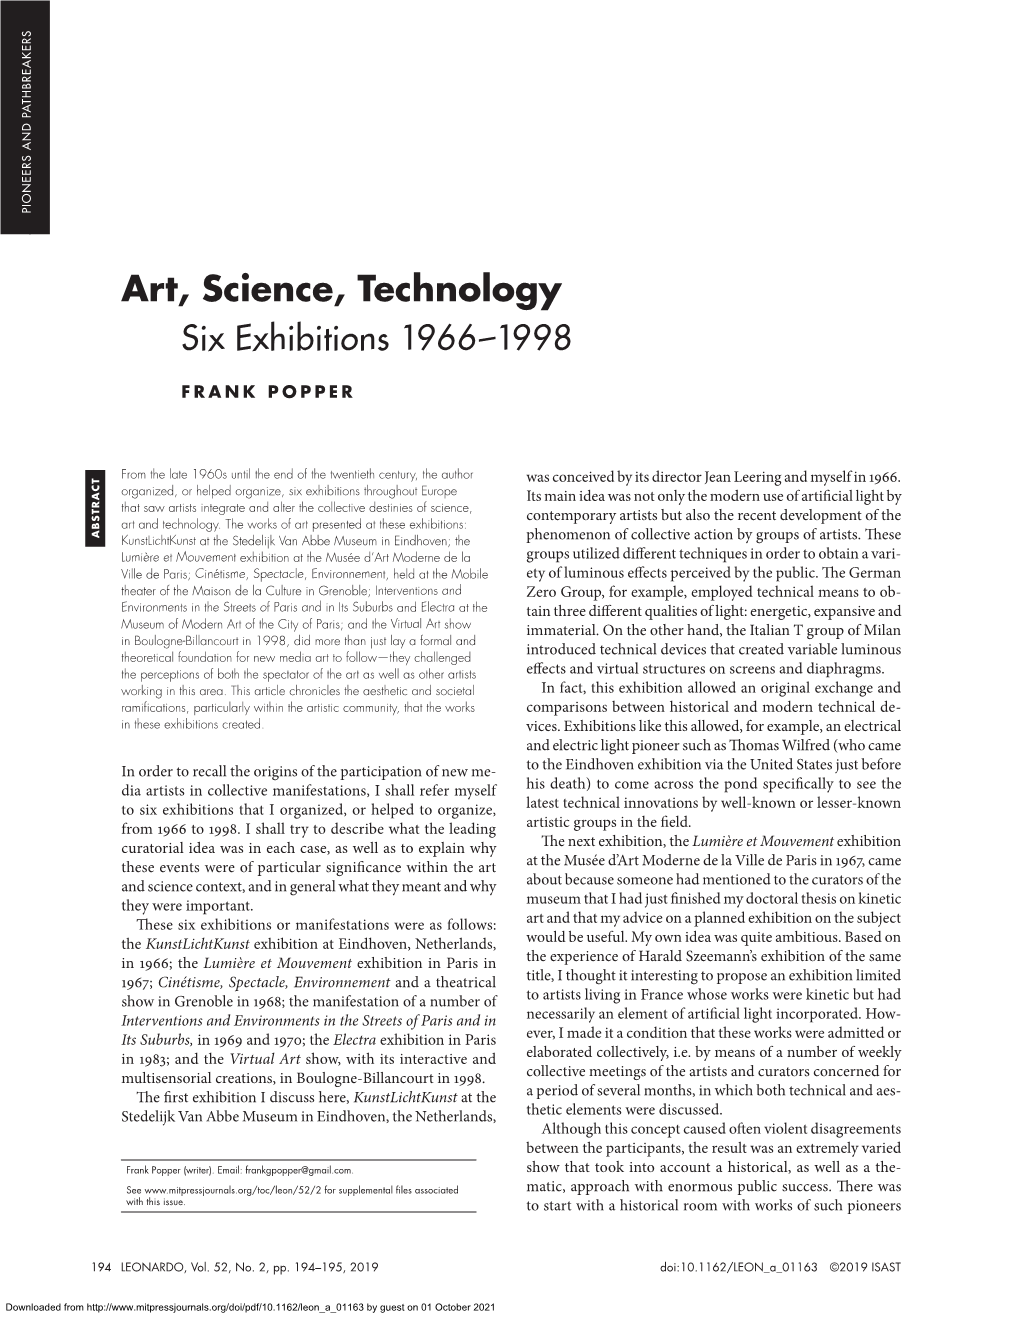 Art, Science, Technology Relation- the Users and Spectators